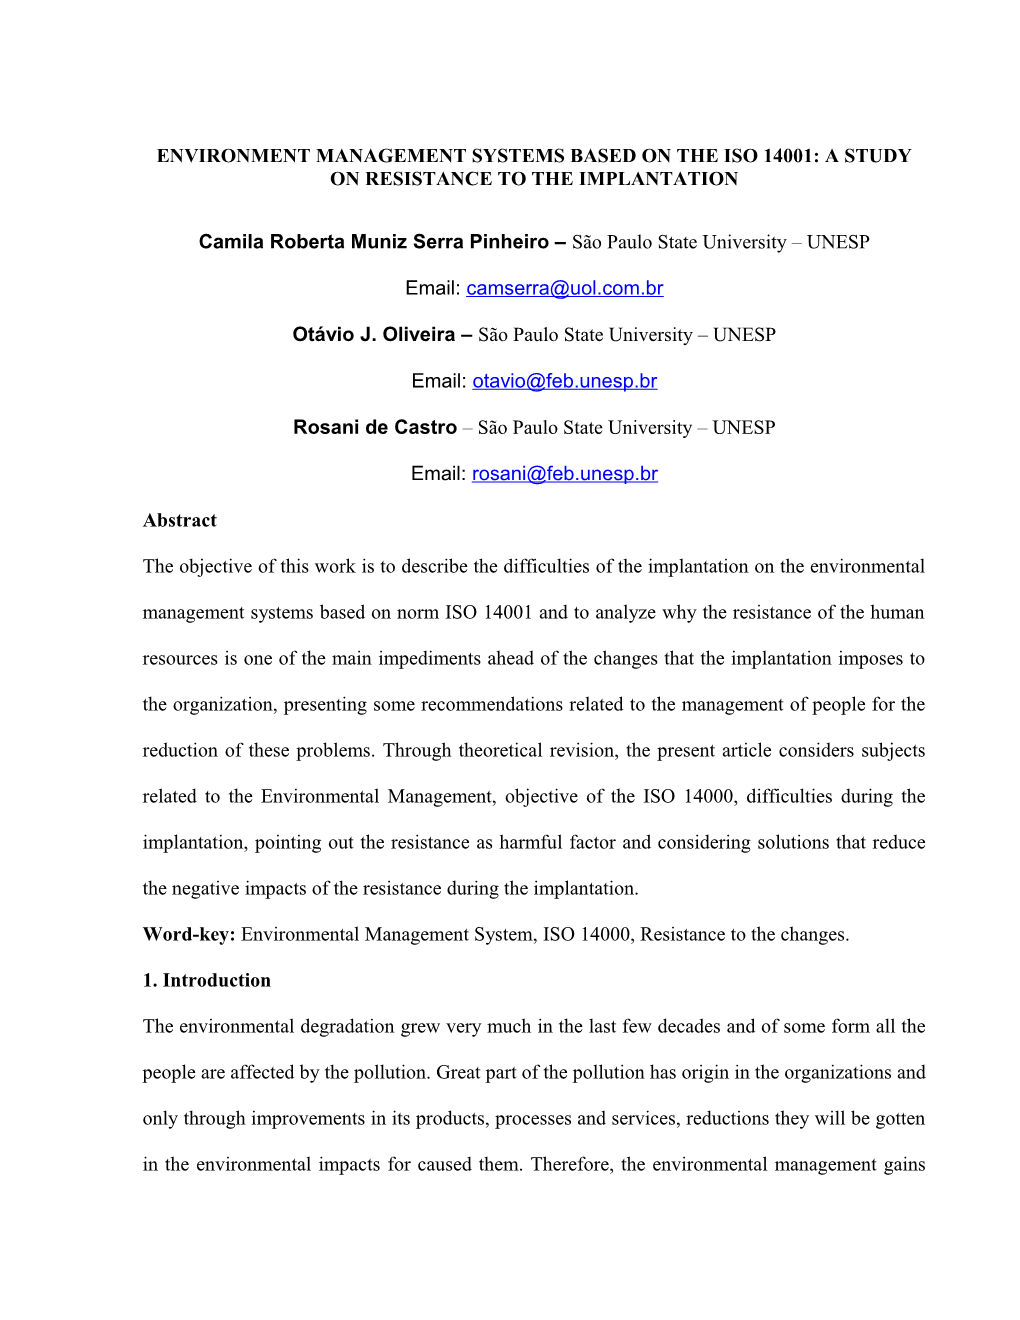 SYSTEMS of AMBIENT MANAGEMENT ISO 14001: a STUDY on RESISTANCE to the IMPLANTATION Camila